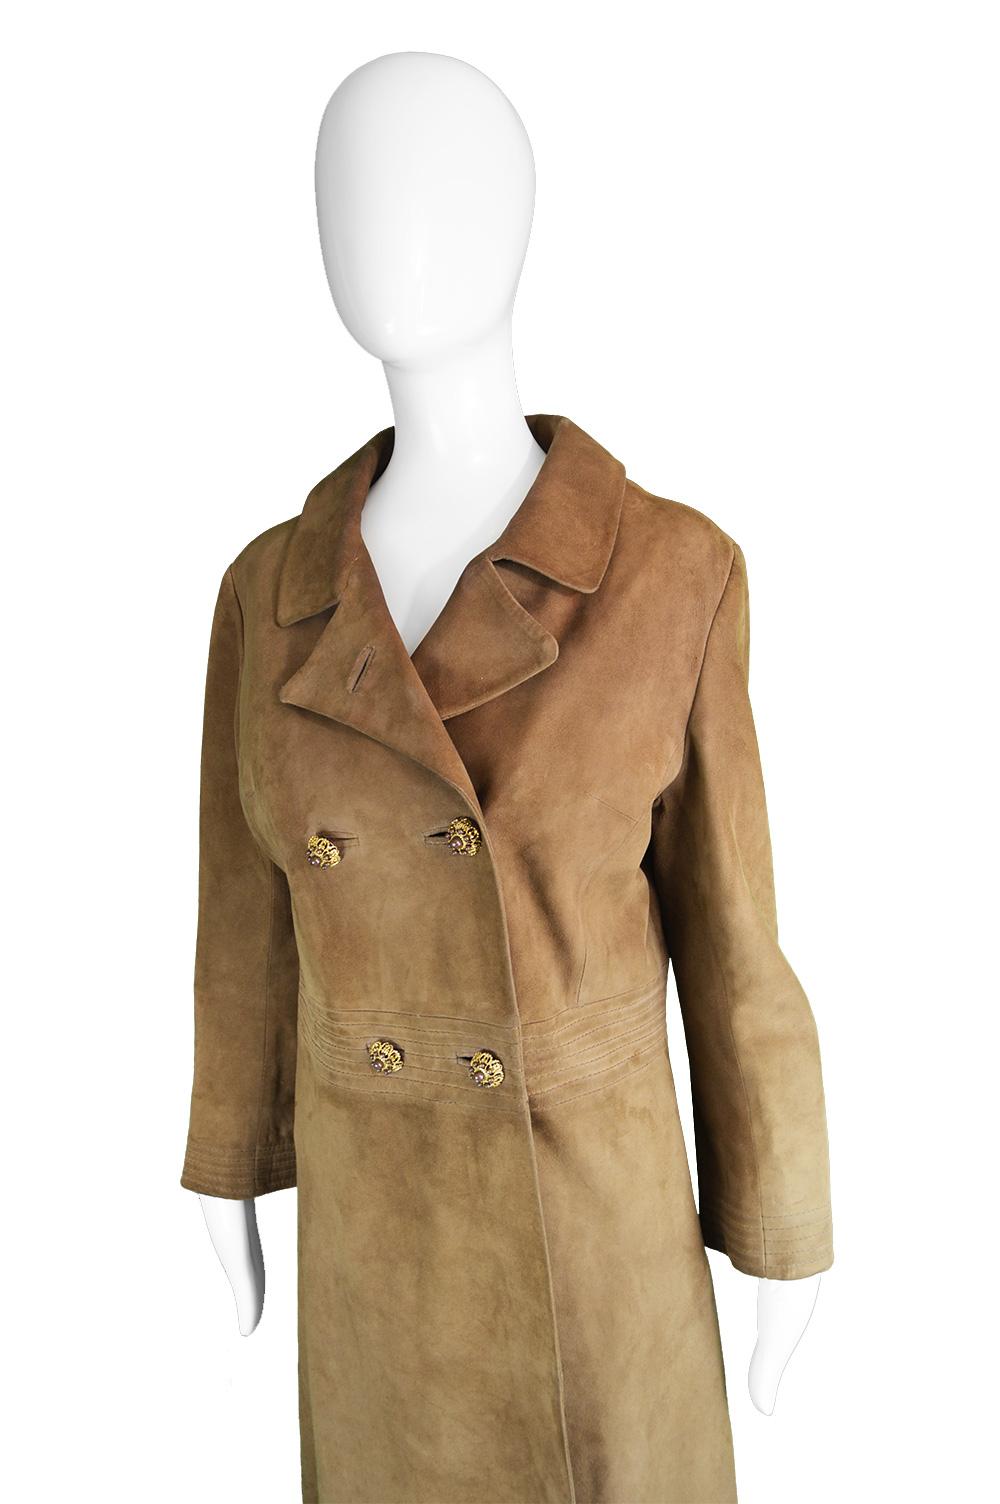 Loewe Rare Vintage 1960s Brown Suede Leather Double Breasted Coat

Estimated Size: Women's Medium. Please check measurements & description by clicking 'Continue Reading' below.  
Bust - 40” / 101cm (allow roughly 2-4